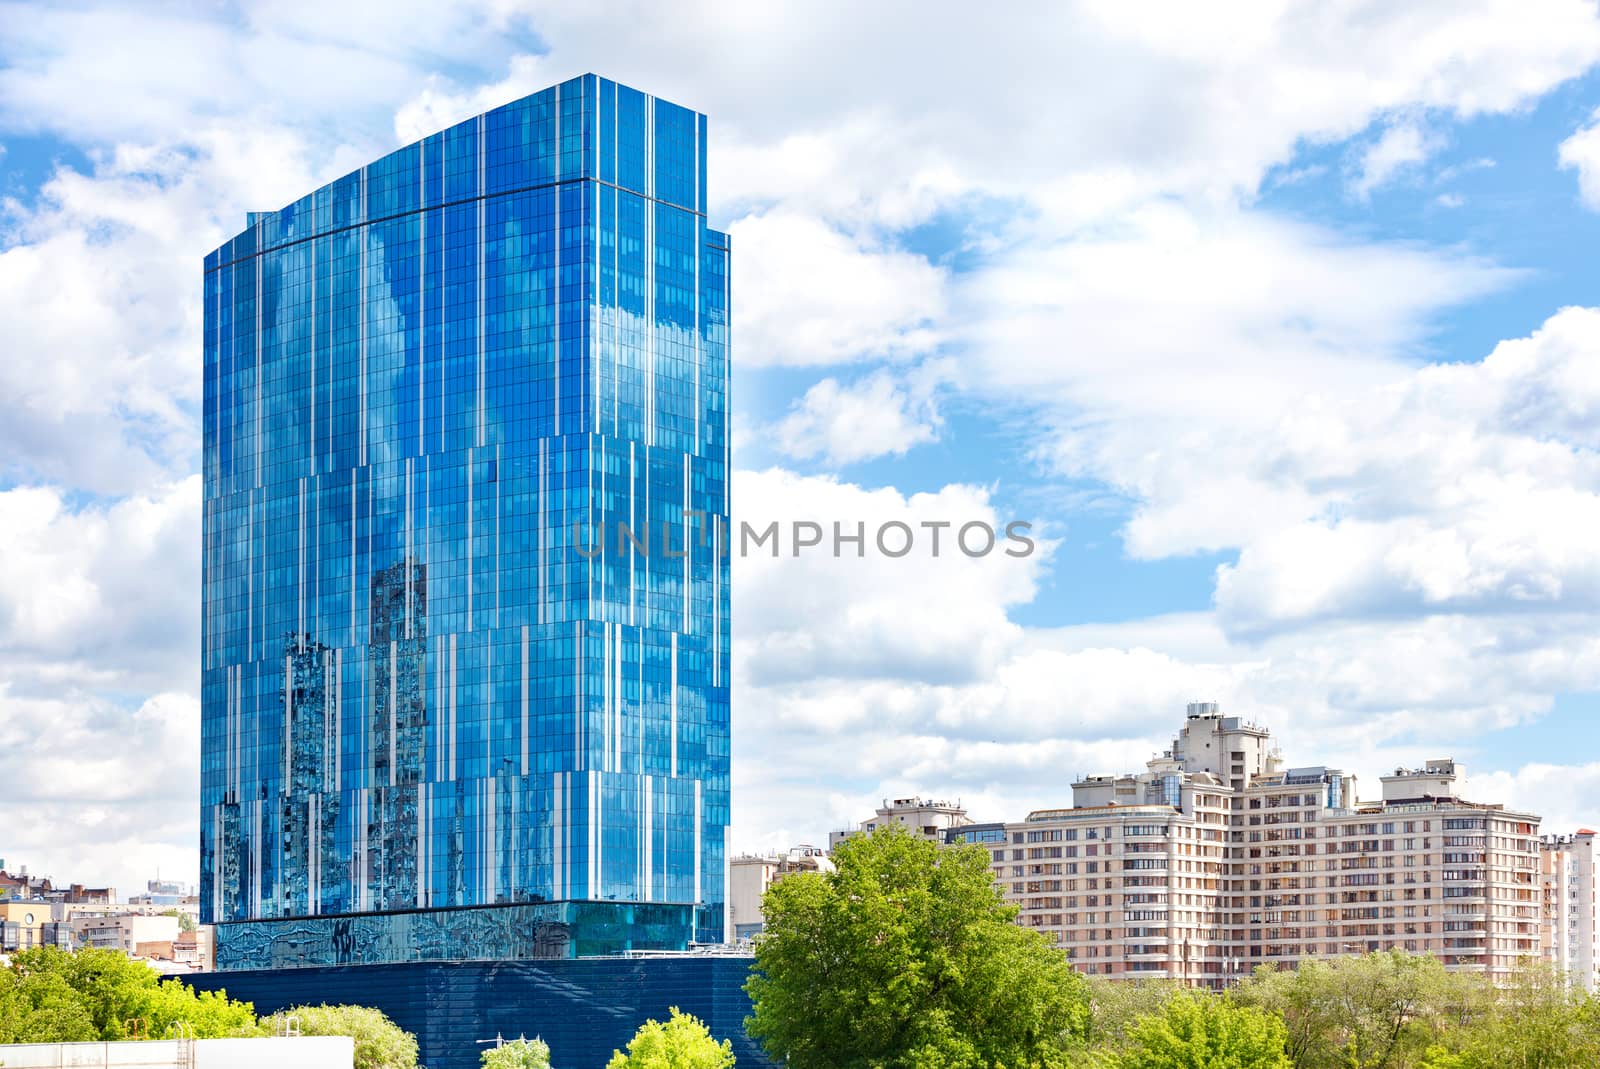 The beautiful glass facade of the modern building reflects the blue sky and white clouds in its windows against the backdrop of the cityscape.